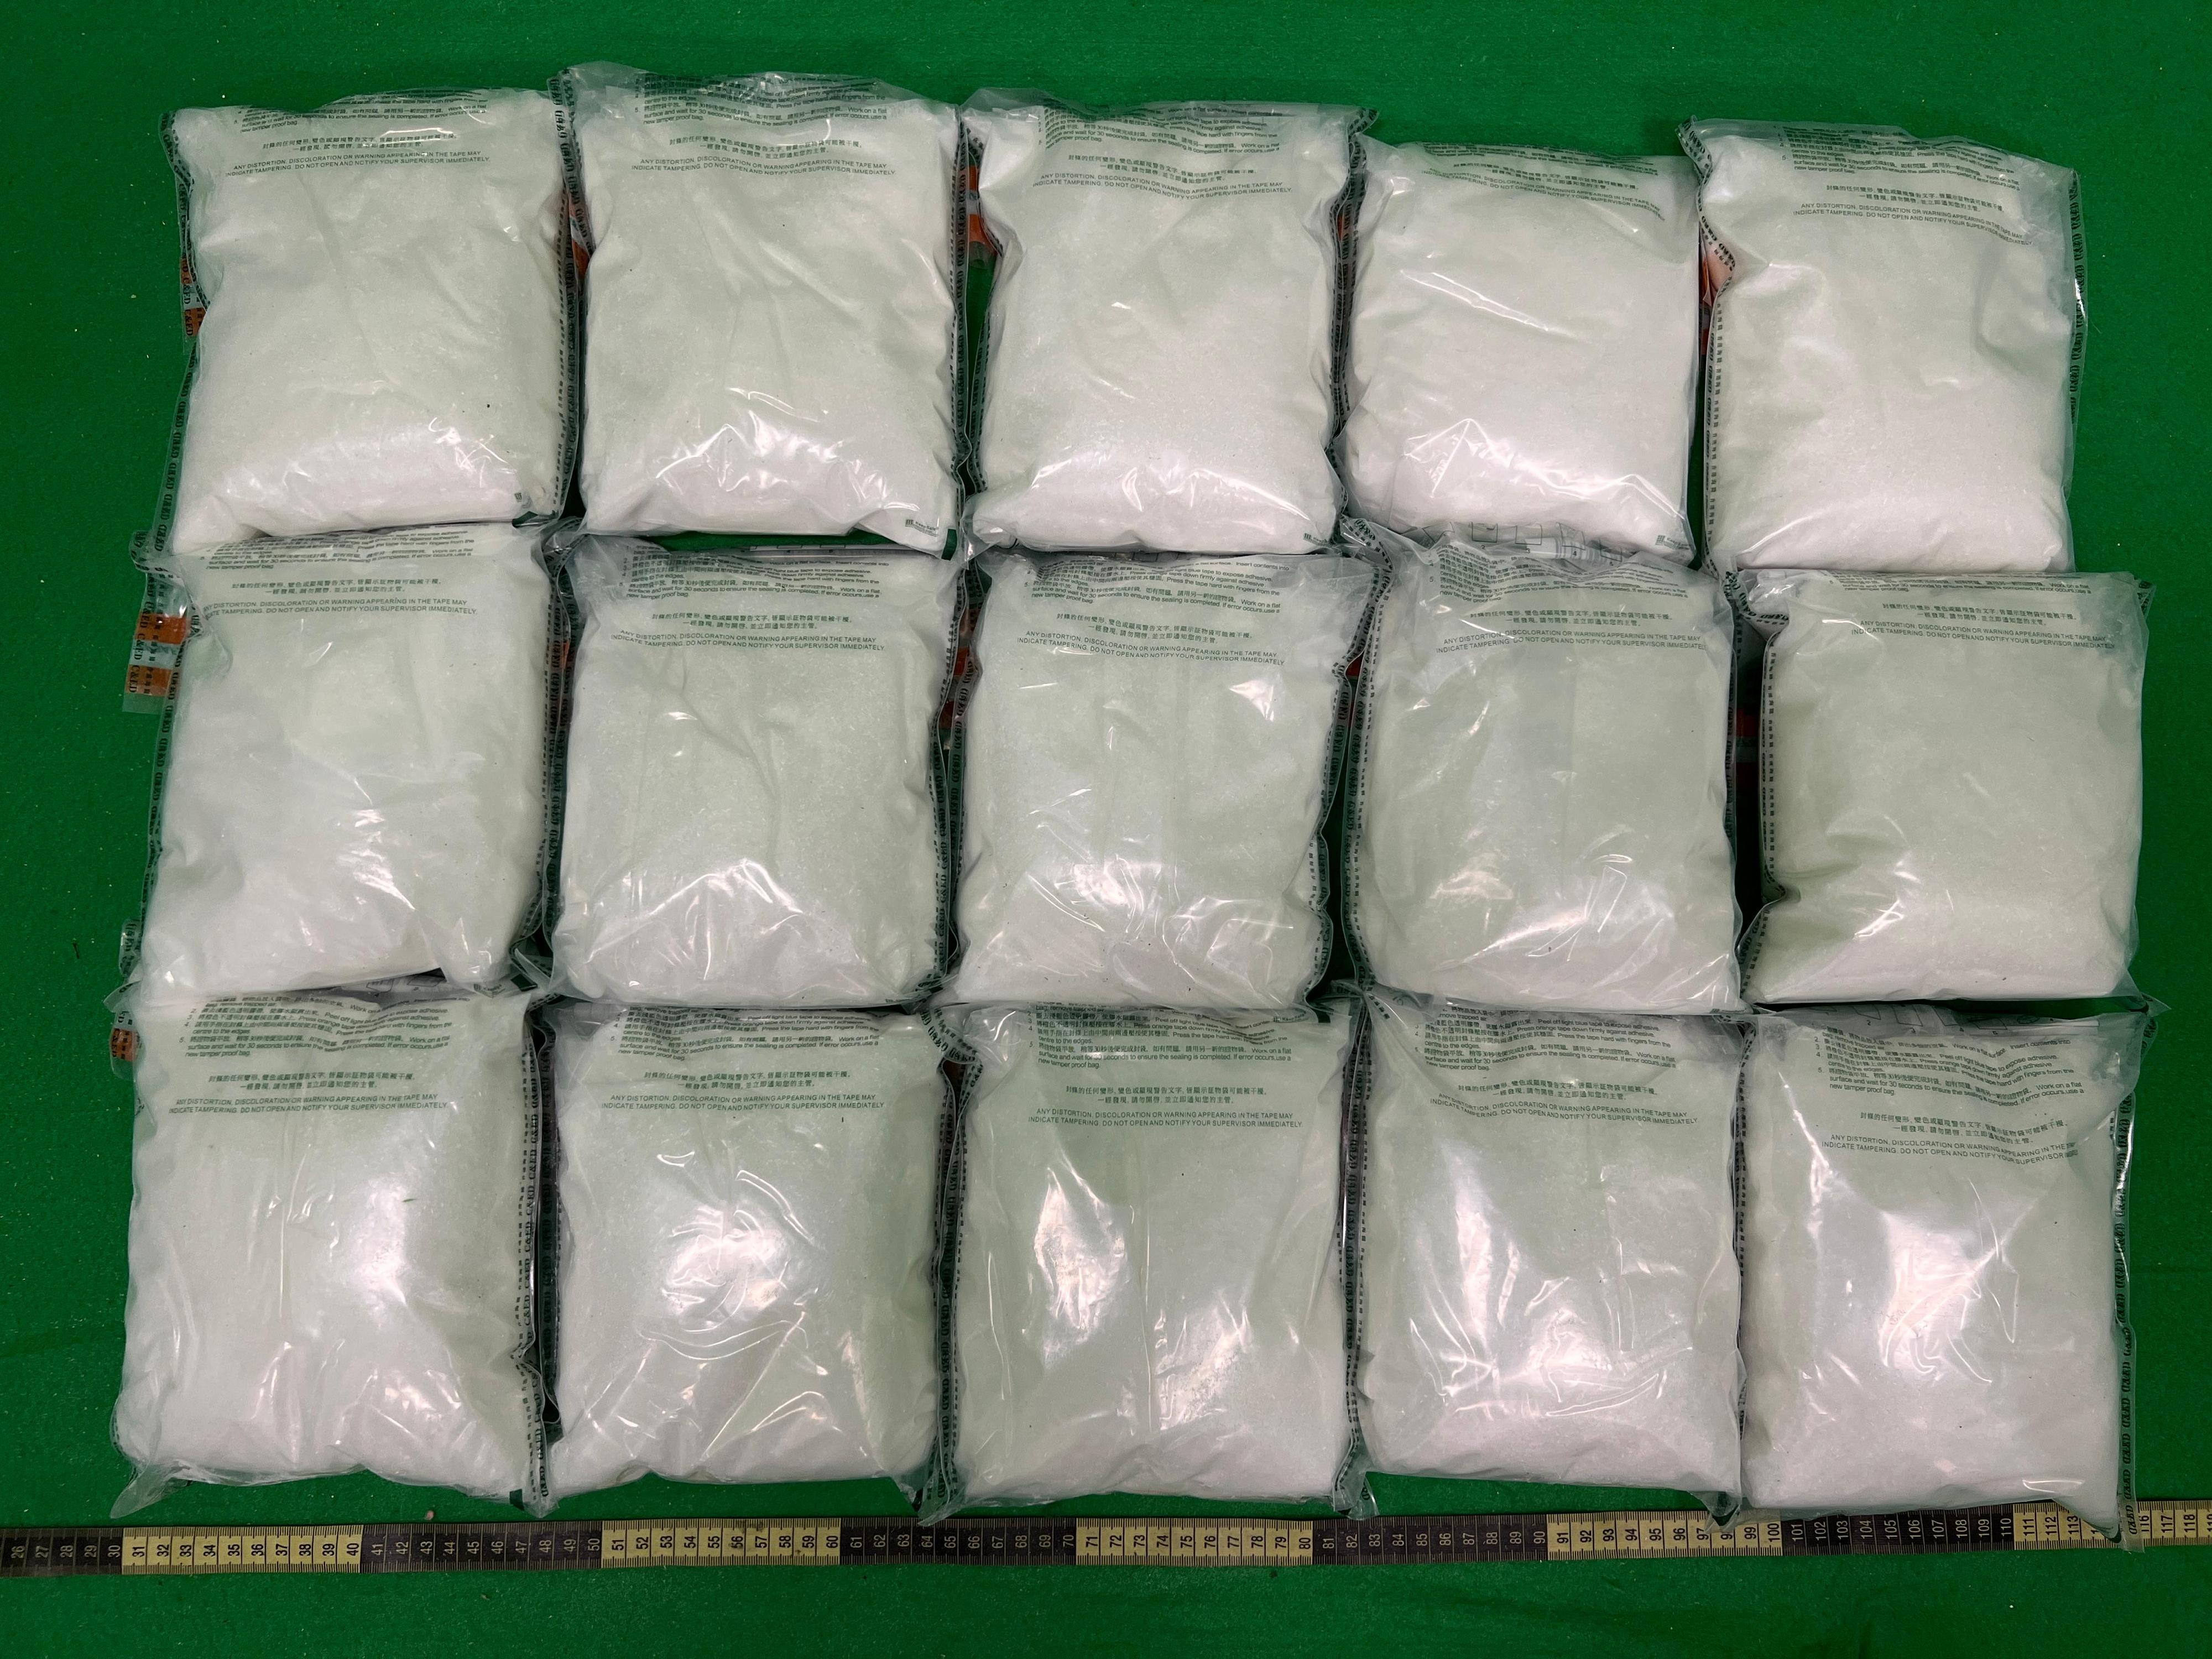 Hong Kong Customs on September 19 seized about 15 kilograms of suspected ketamine with an estimated market value of about $8 million at Hong Kong International Airport. Photo shows the suspected ketamine seized.
